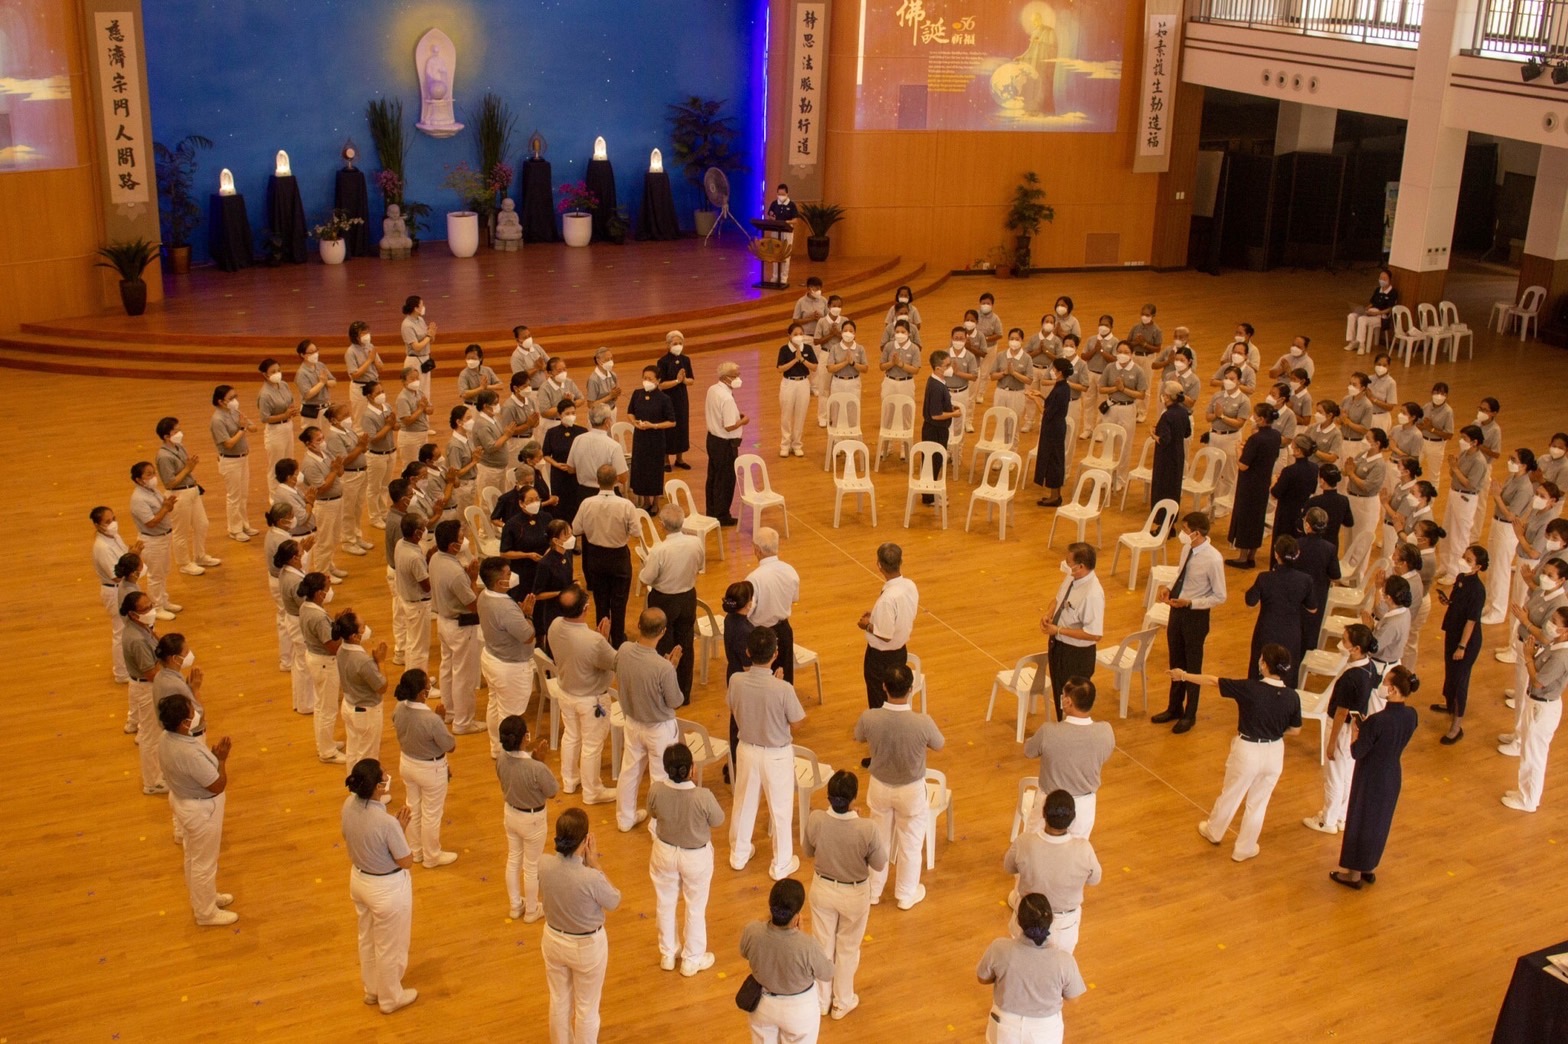 At the Jing Si Auditorium, volunteers practice their formation for the Buddha Bathing Ceremony. 【Photo by Mavi Saldonido】